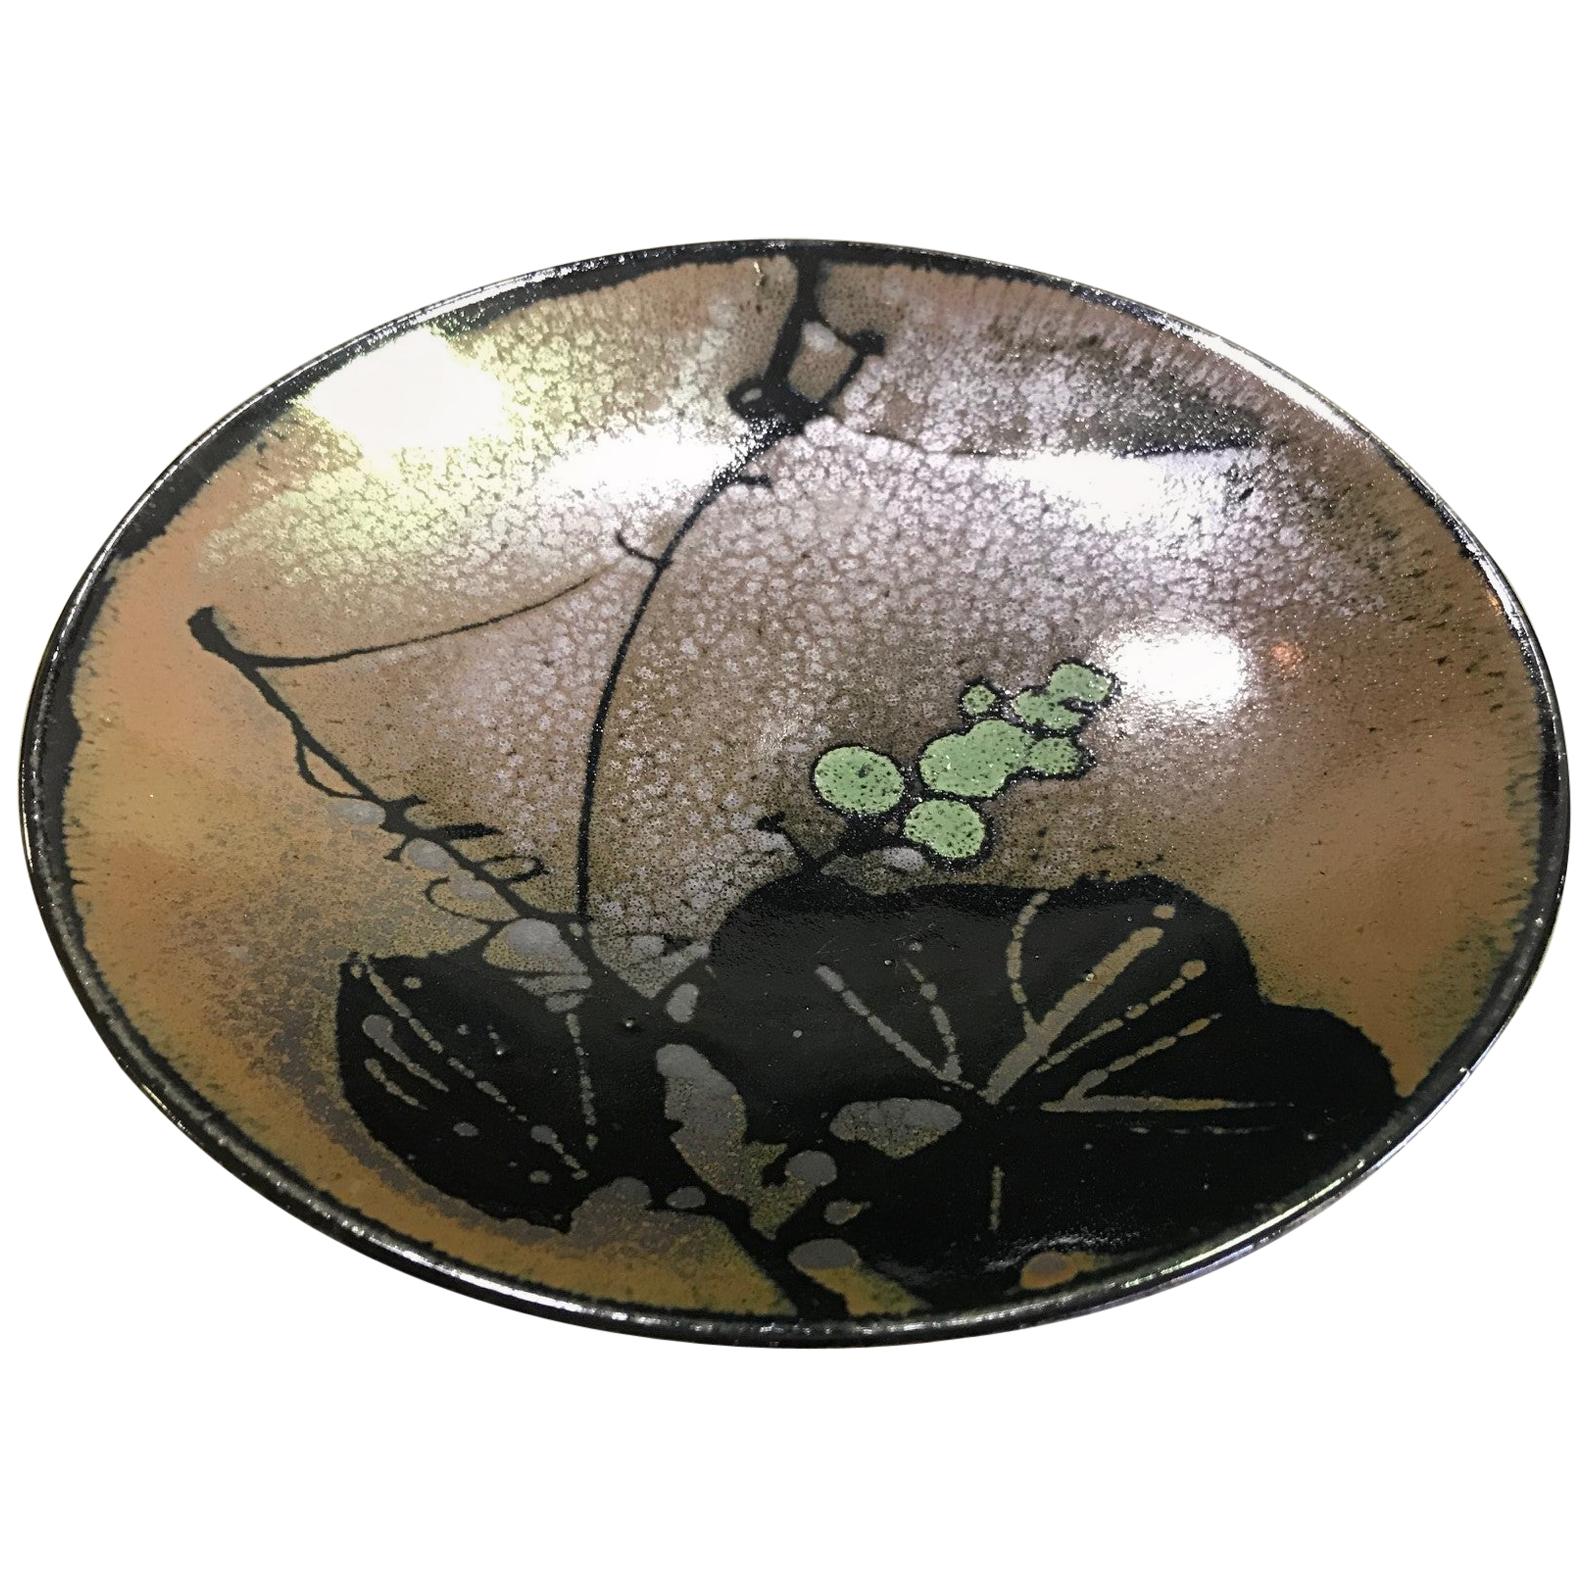 Beautiful Japanese Mashiko Glazed Ceramic Pottery Plate Charger with Lily Pads